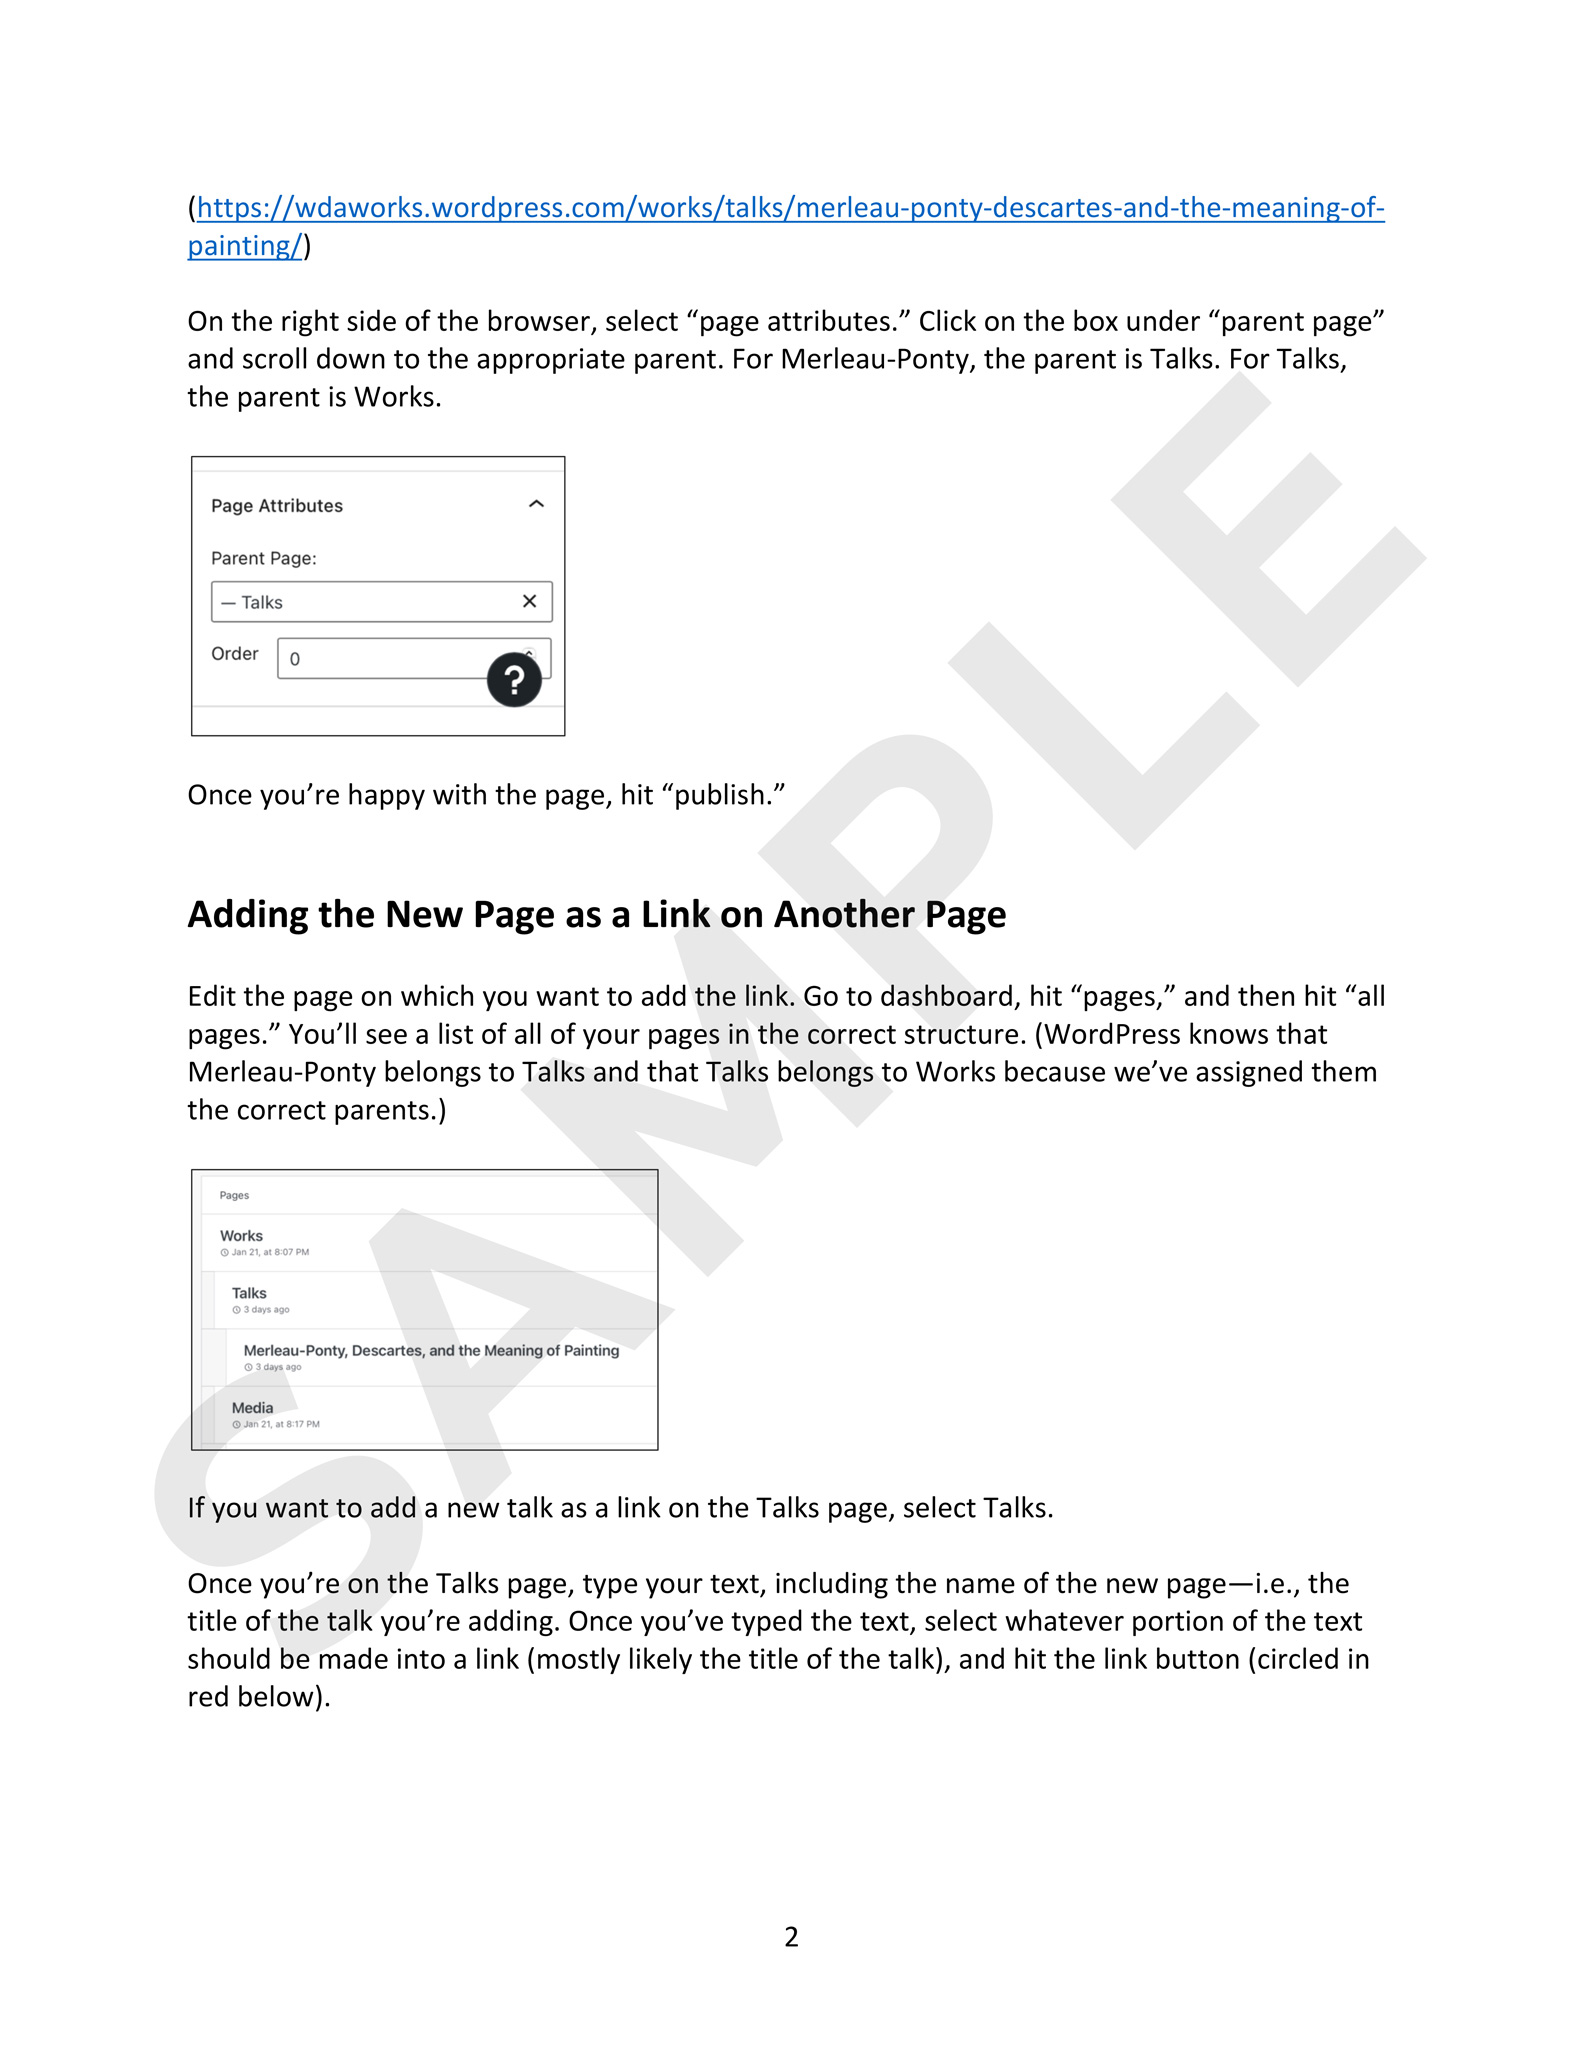 Tutorial showing how to create a new page in WordPress and how to add that page as a link on another page. Includes screenshots of the functions for selecting parent pages and for navigating to pages.